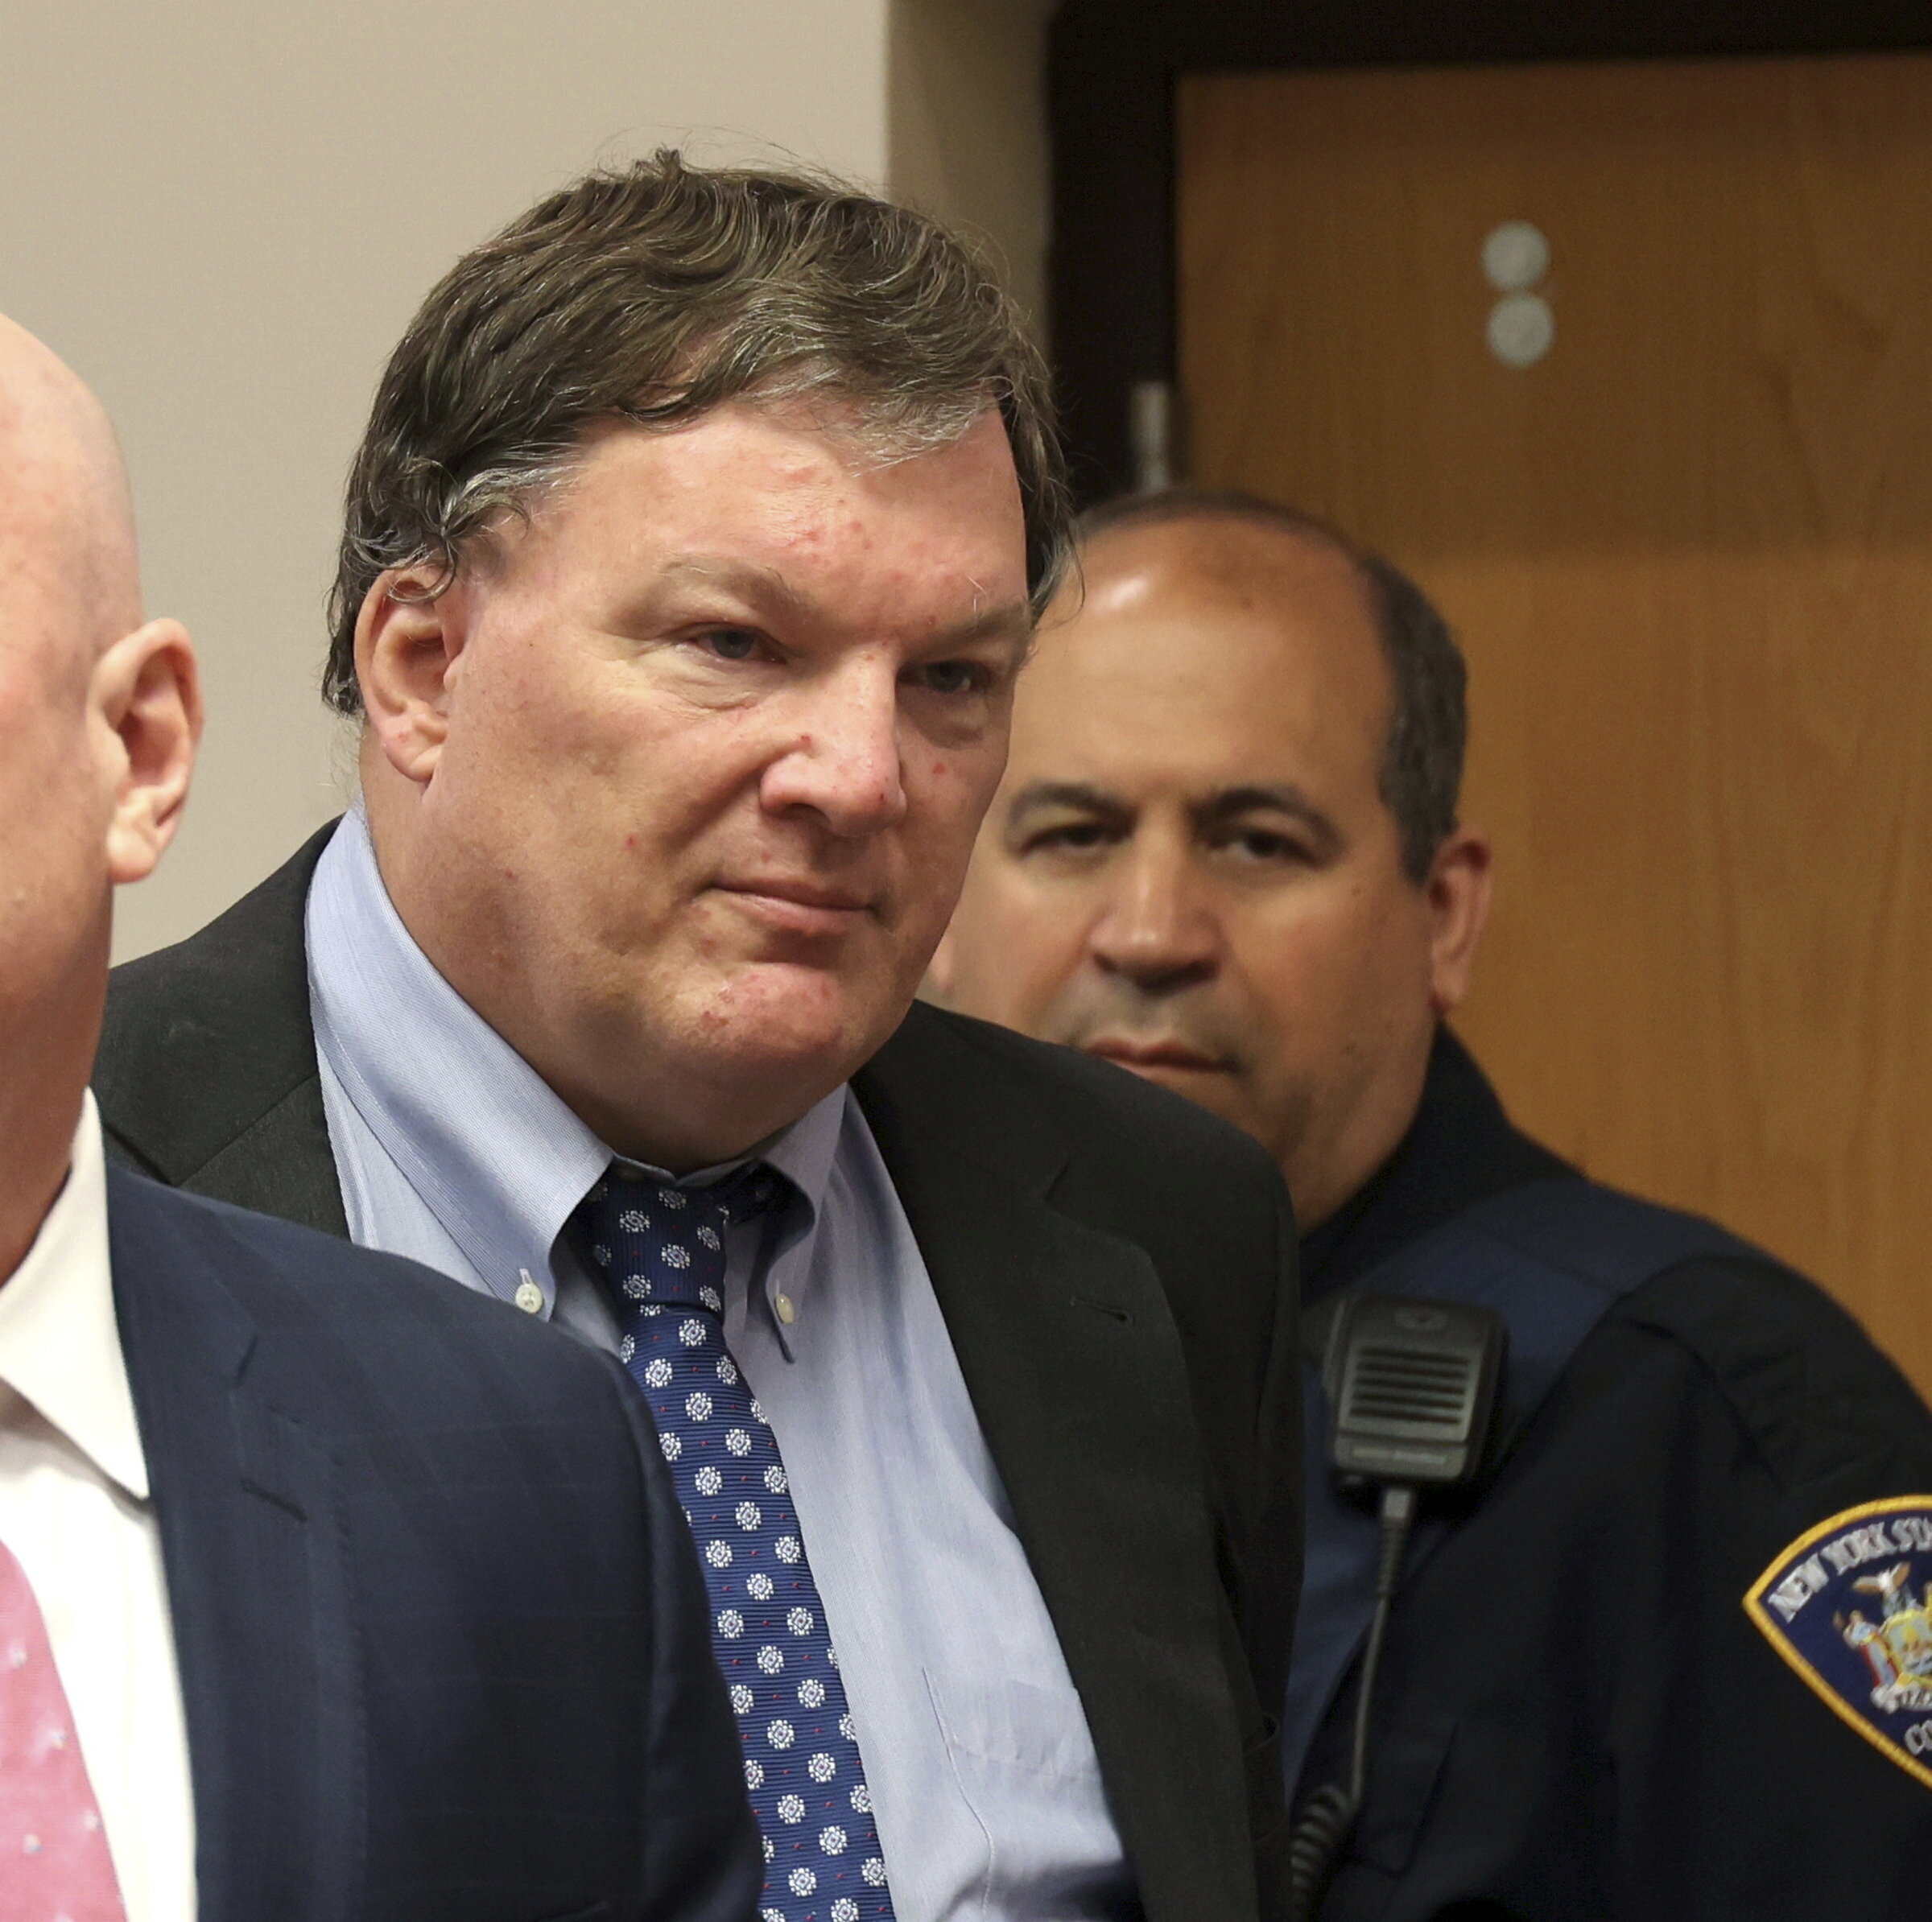 Rex Heuermann, charged in the Gilgo Beach serial killings on Long Island, appears Thursday for a hearing at Suffolk County Court in Riverhead, New York. Heuermann was charged Thursday in the deaths of two more women after prosecutors said they gathered new DNA evidence and found a computer document they said contained a “blueprint” of the crimes.